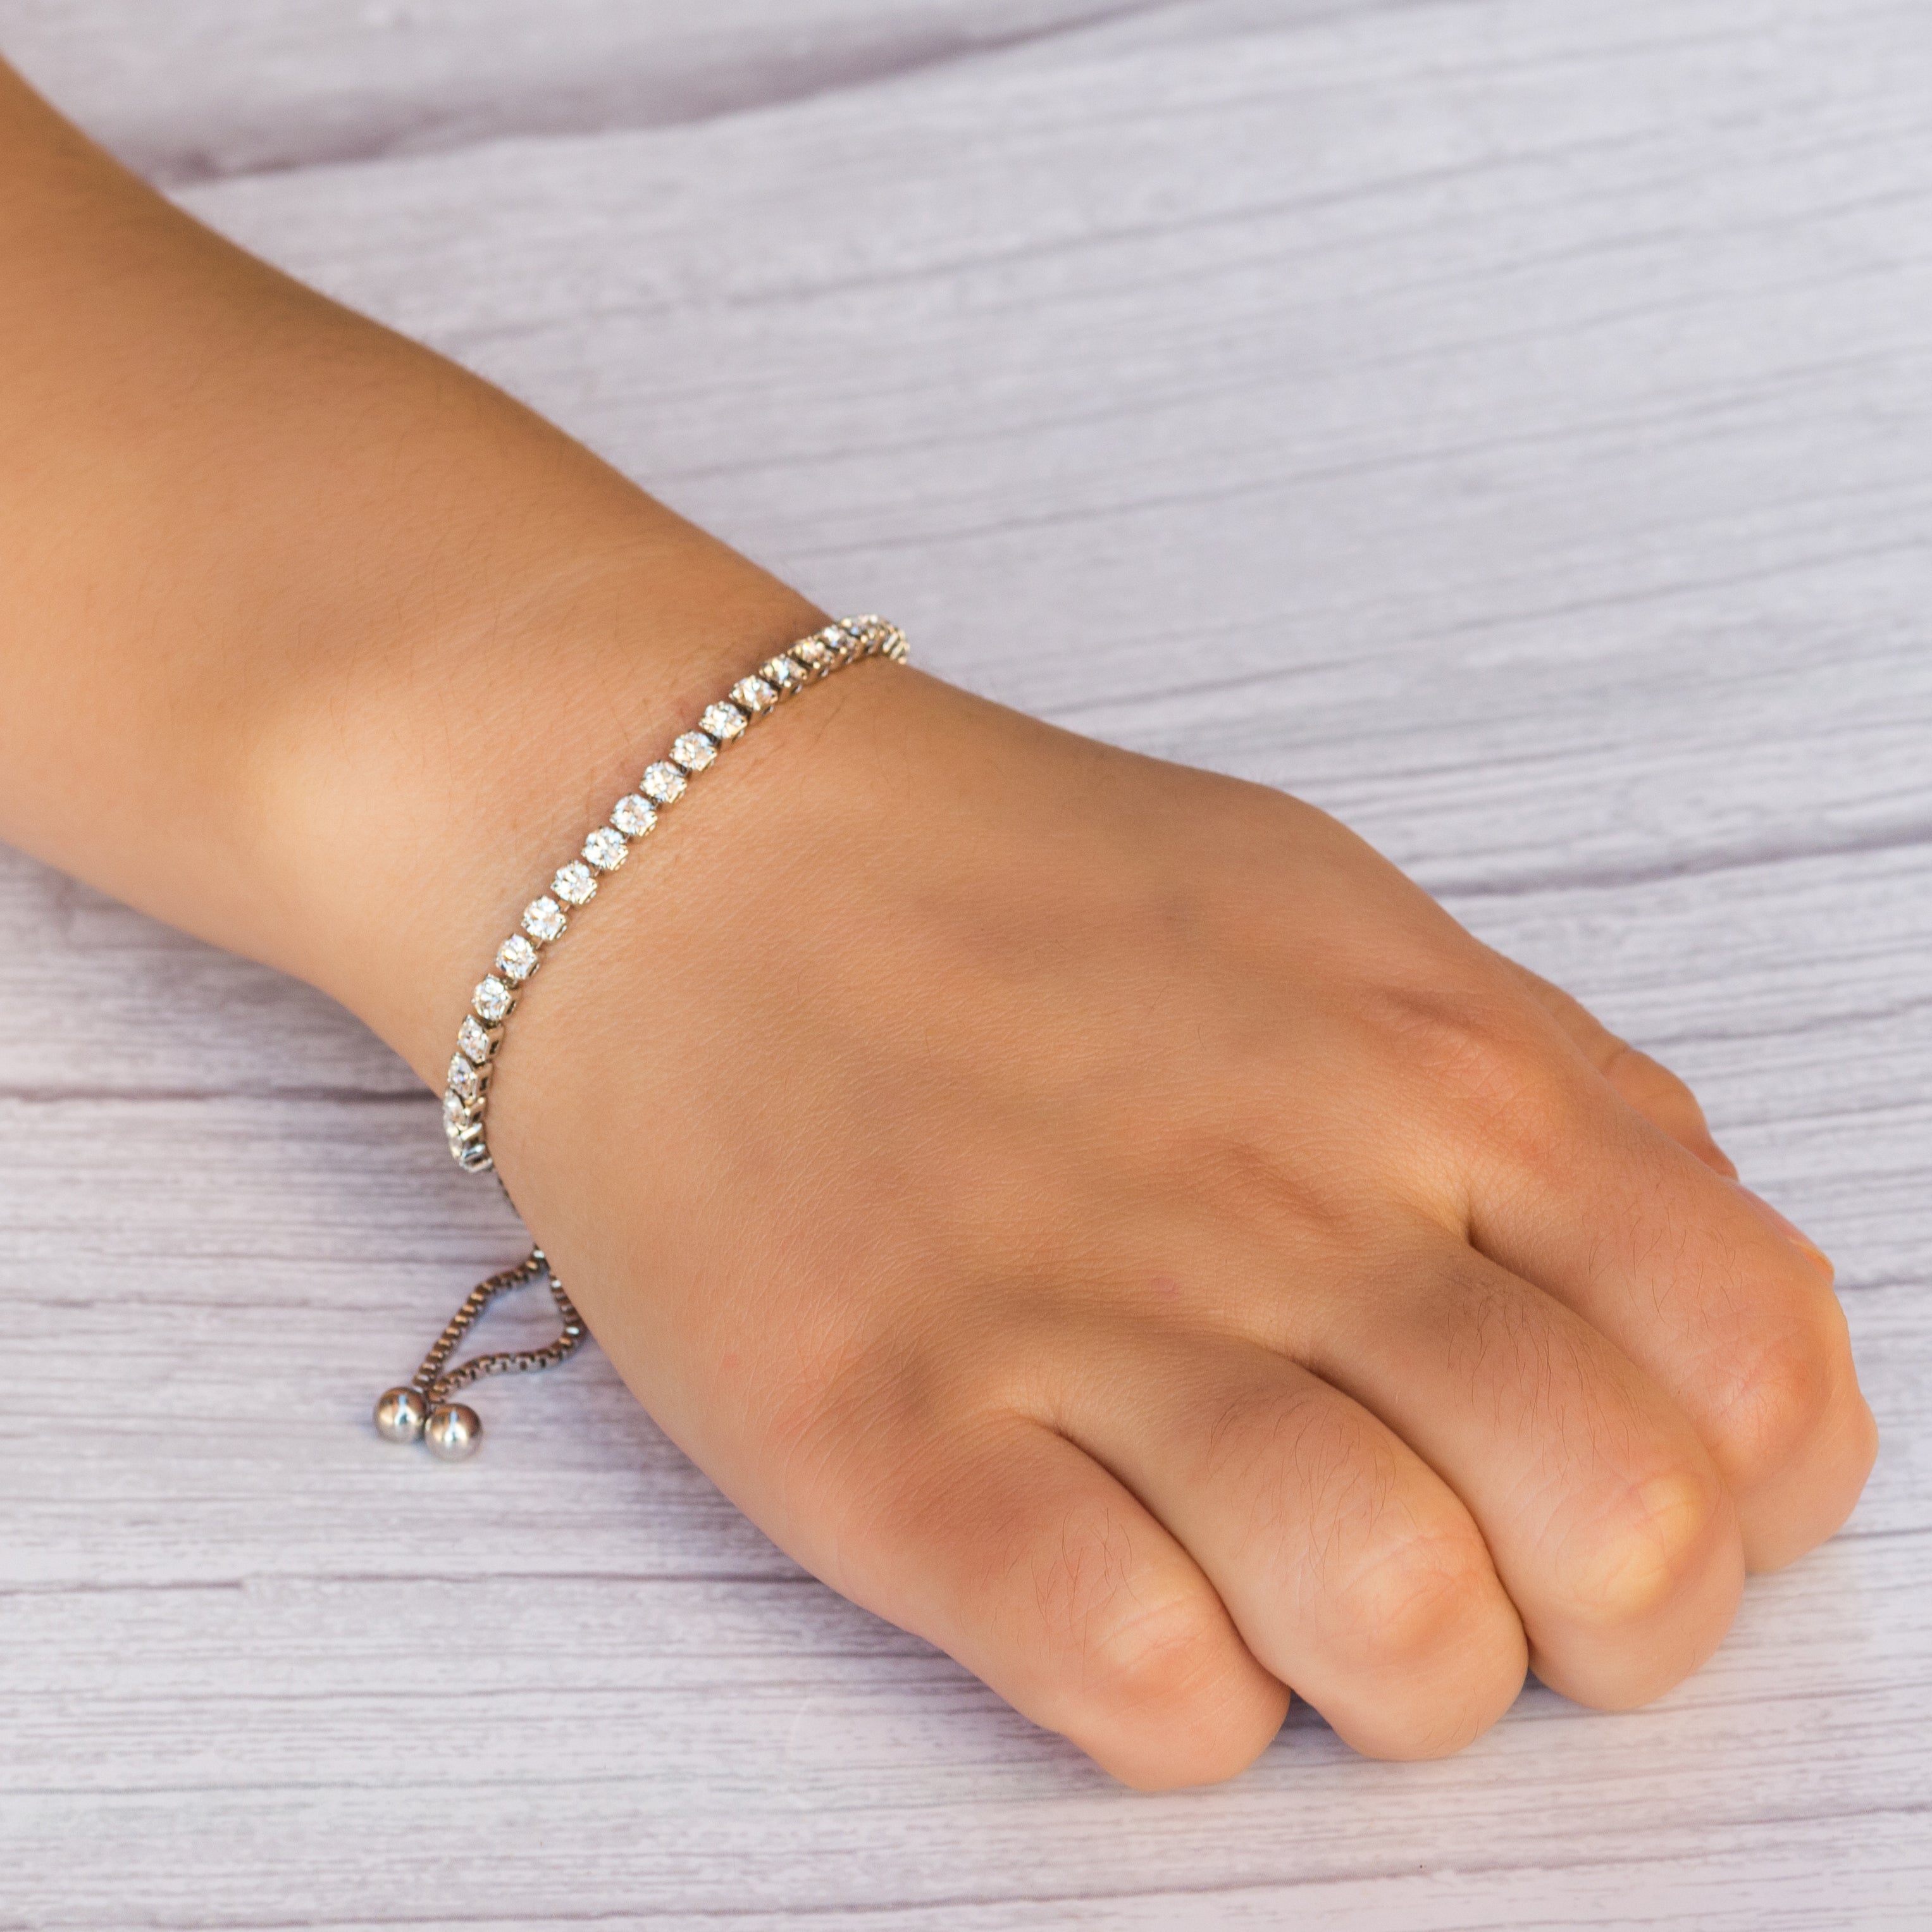 Silver Plated Solitaire Friendship Set Created with Zircondia® Crystals